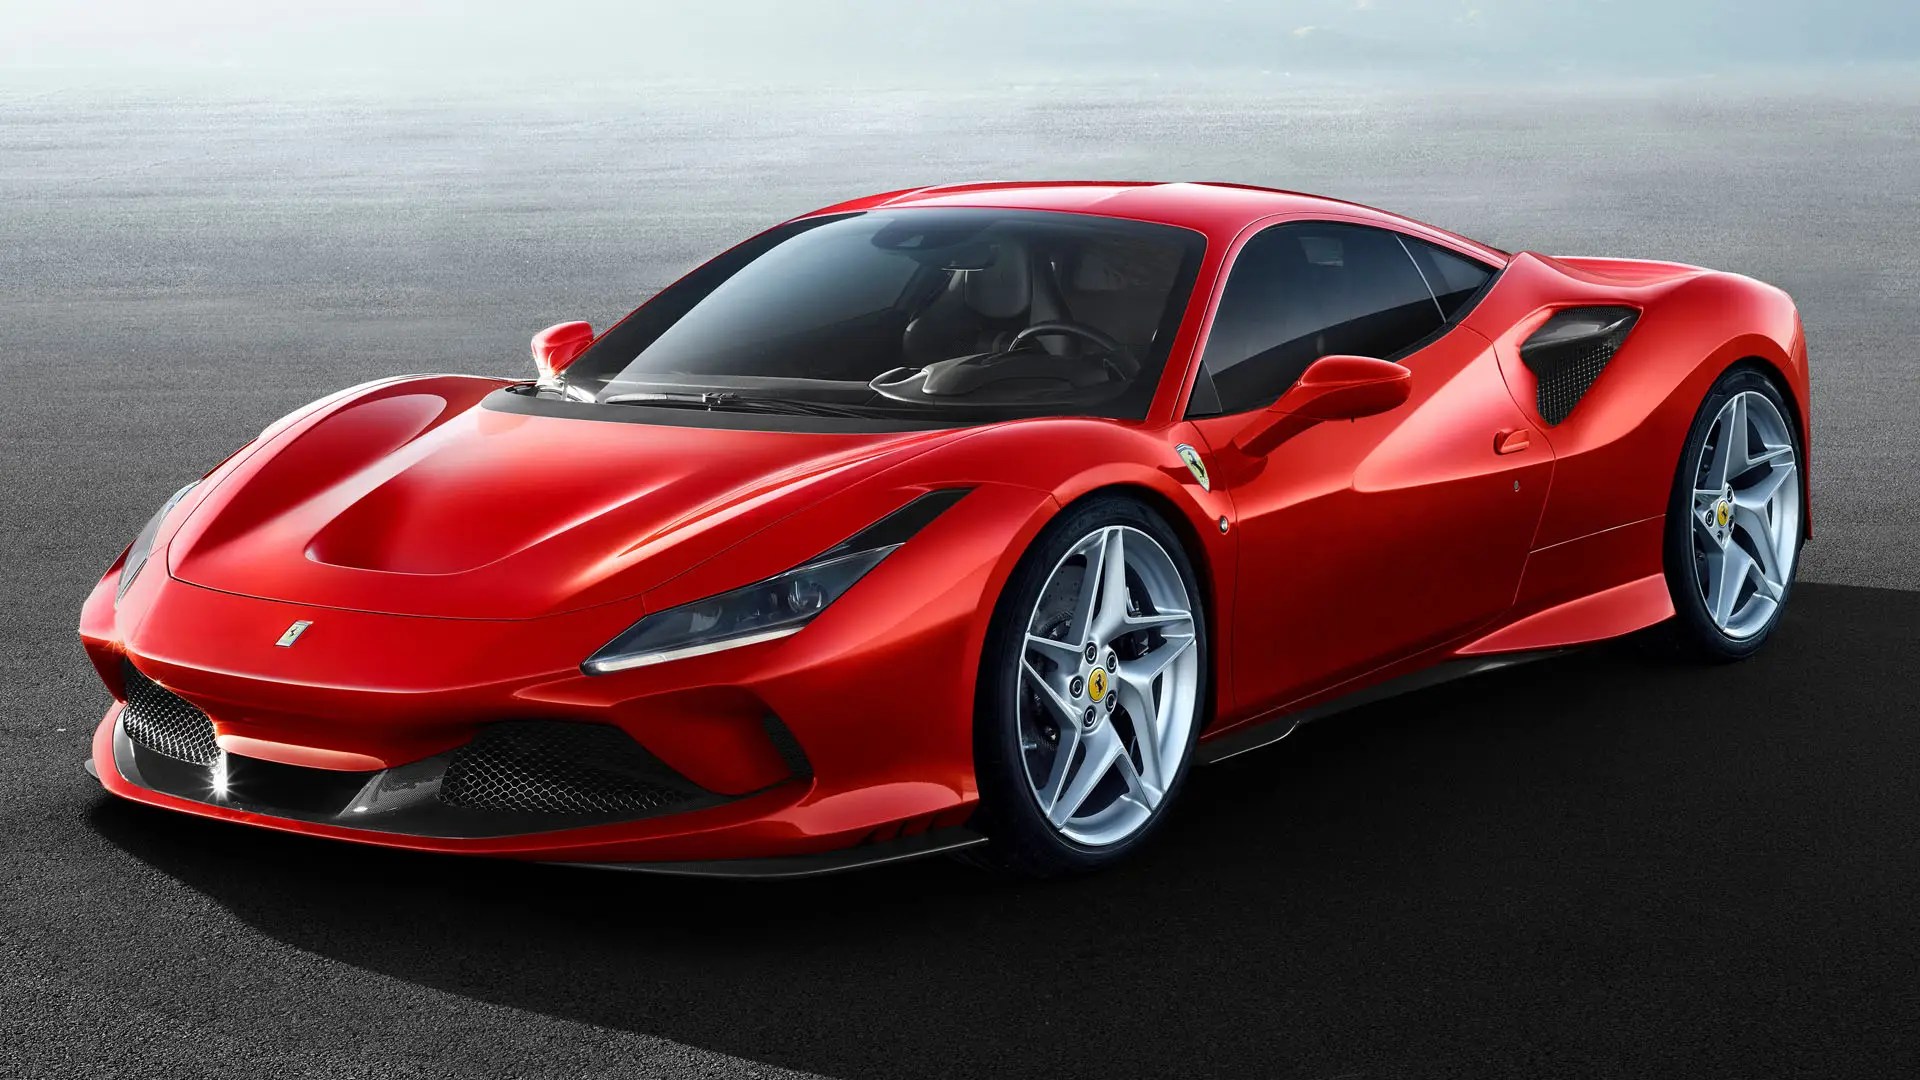 Why the CEO of Ferrari doesn’t care about self-driving cars